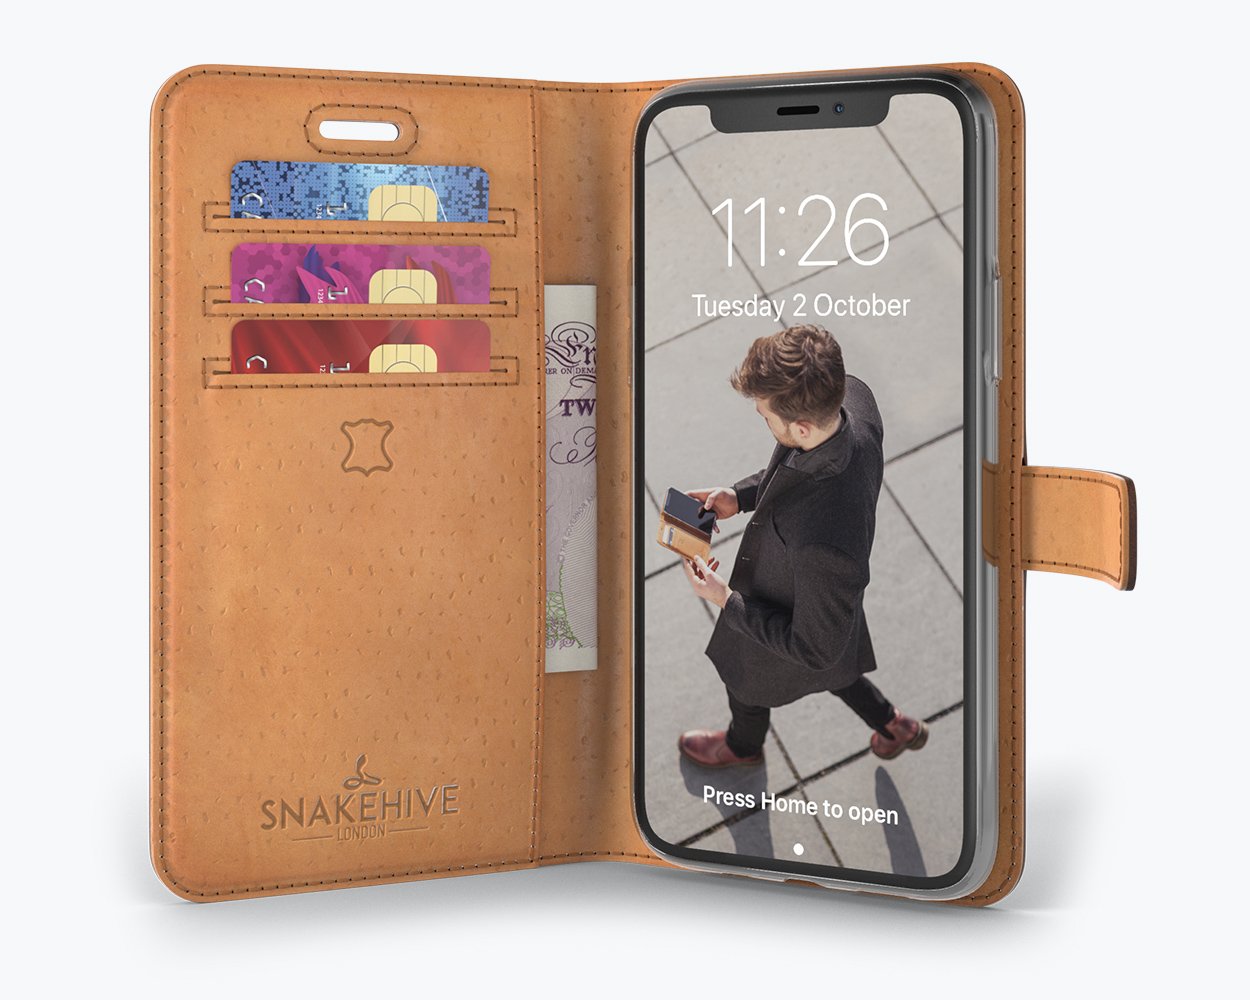 Vintage Leather Wallet - Apple iPhone 11 Pro Max